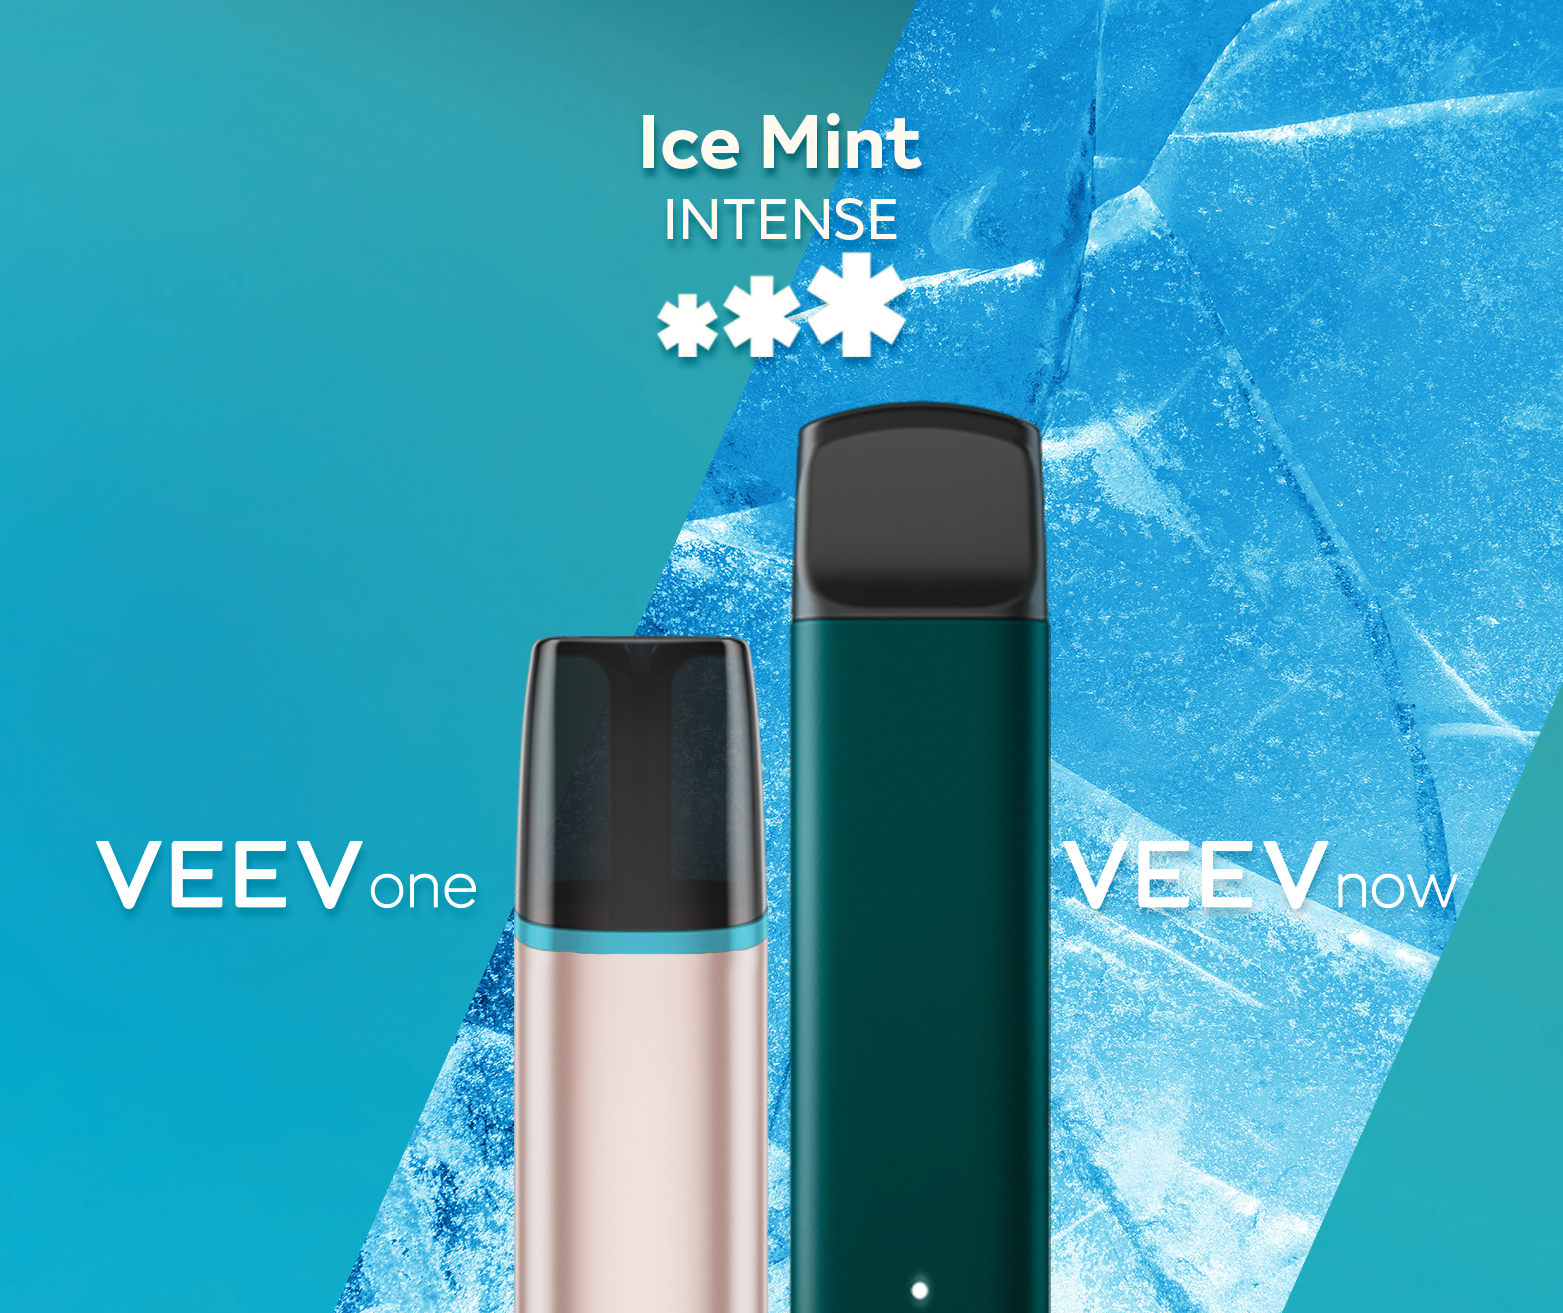 A VEEV ONE pod device and VEEV NOW disposable, both in Ice Mint flavour.